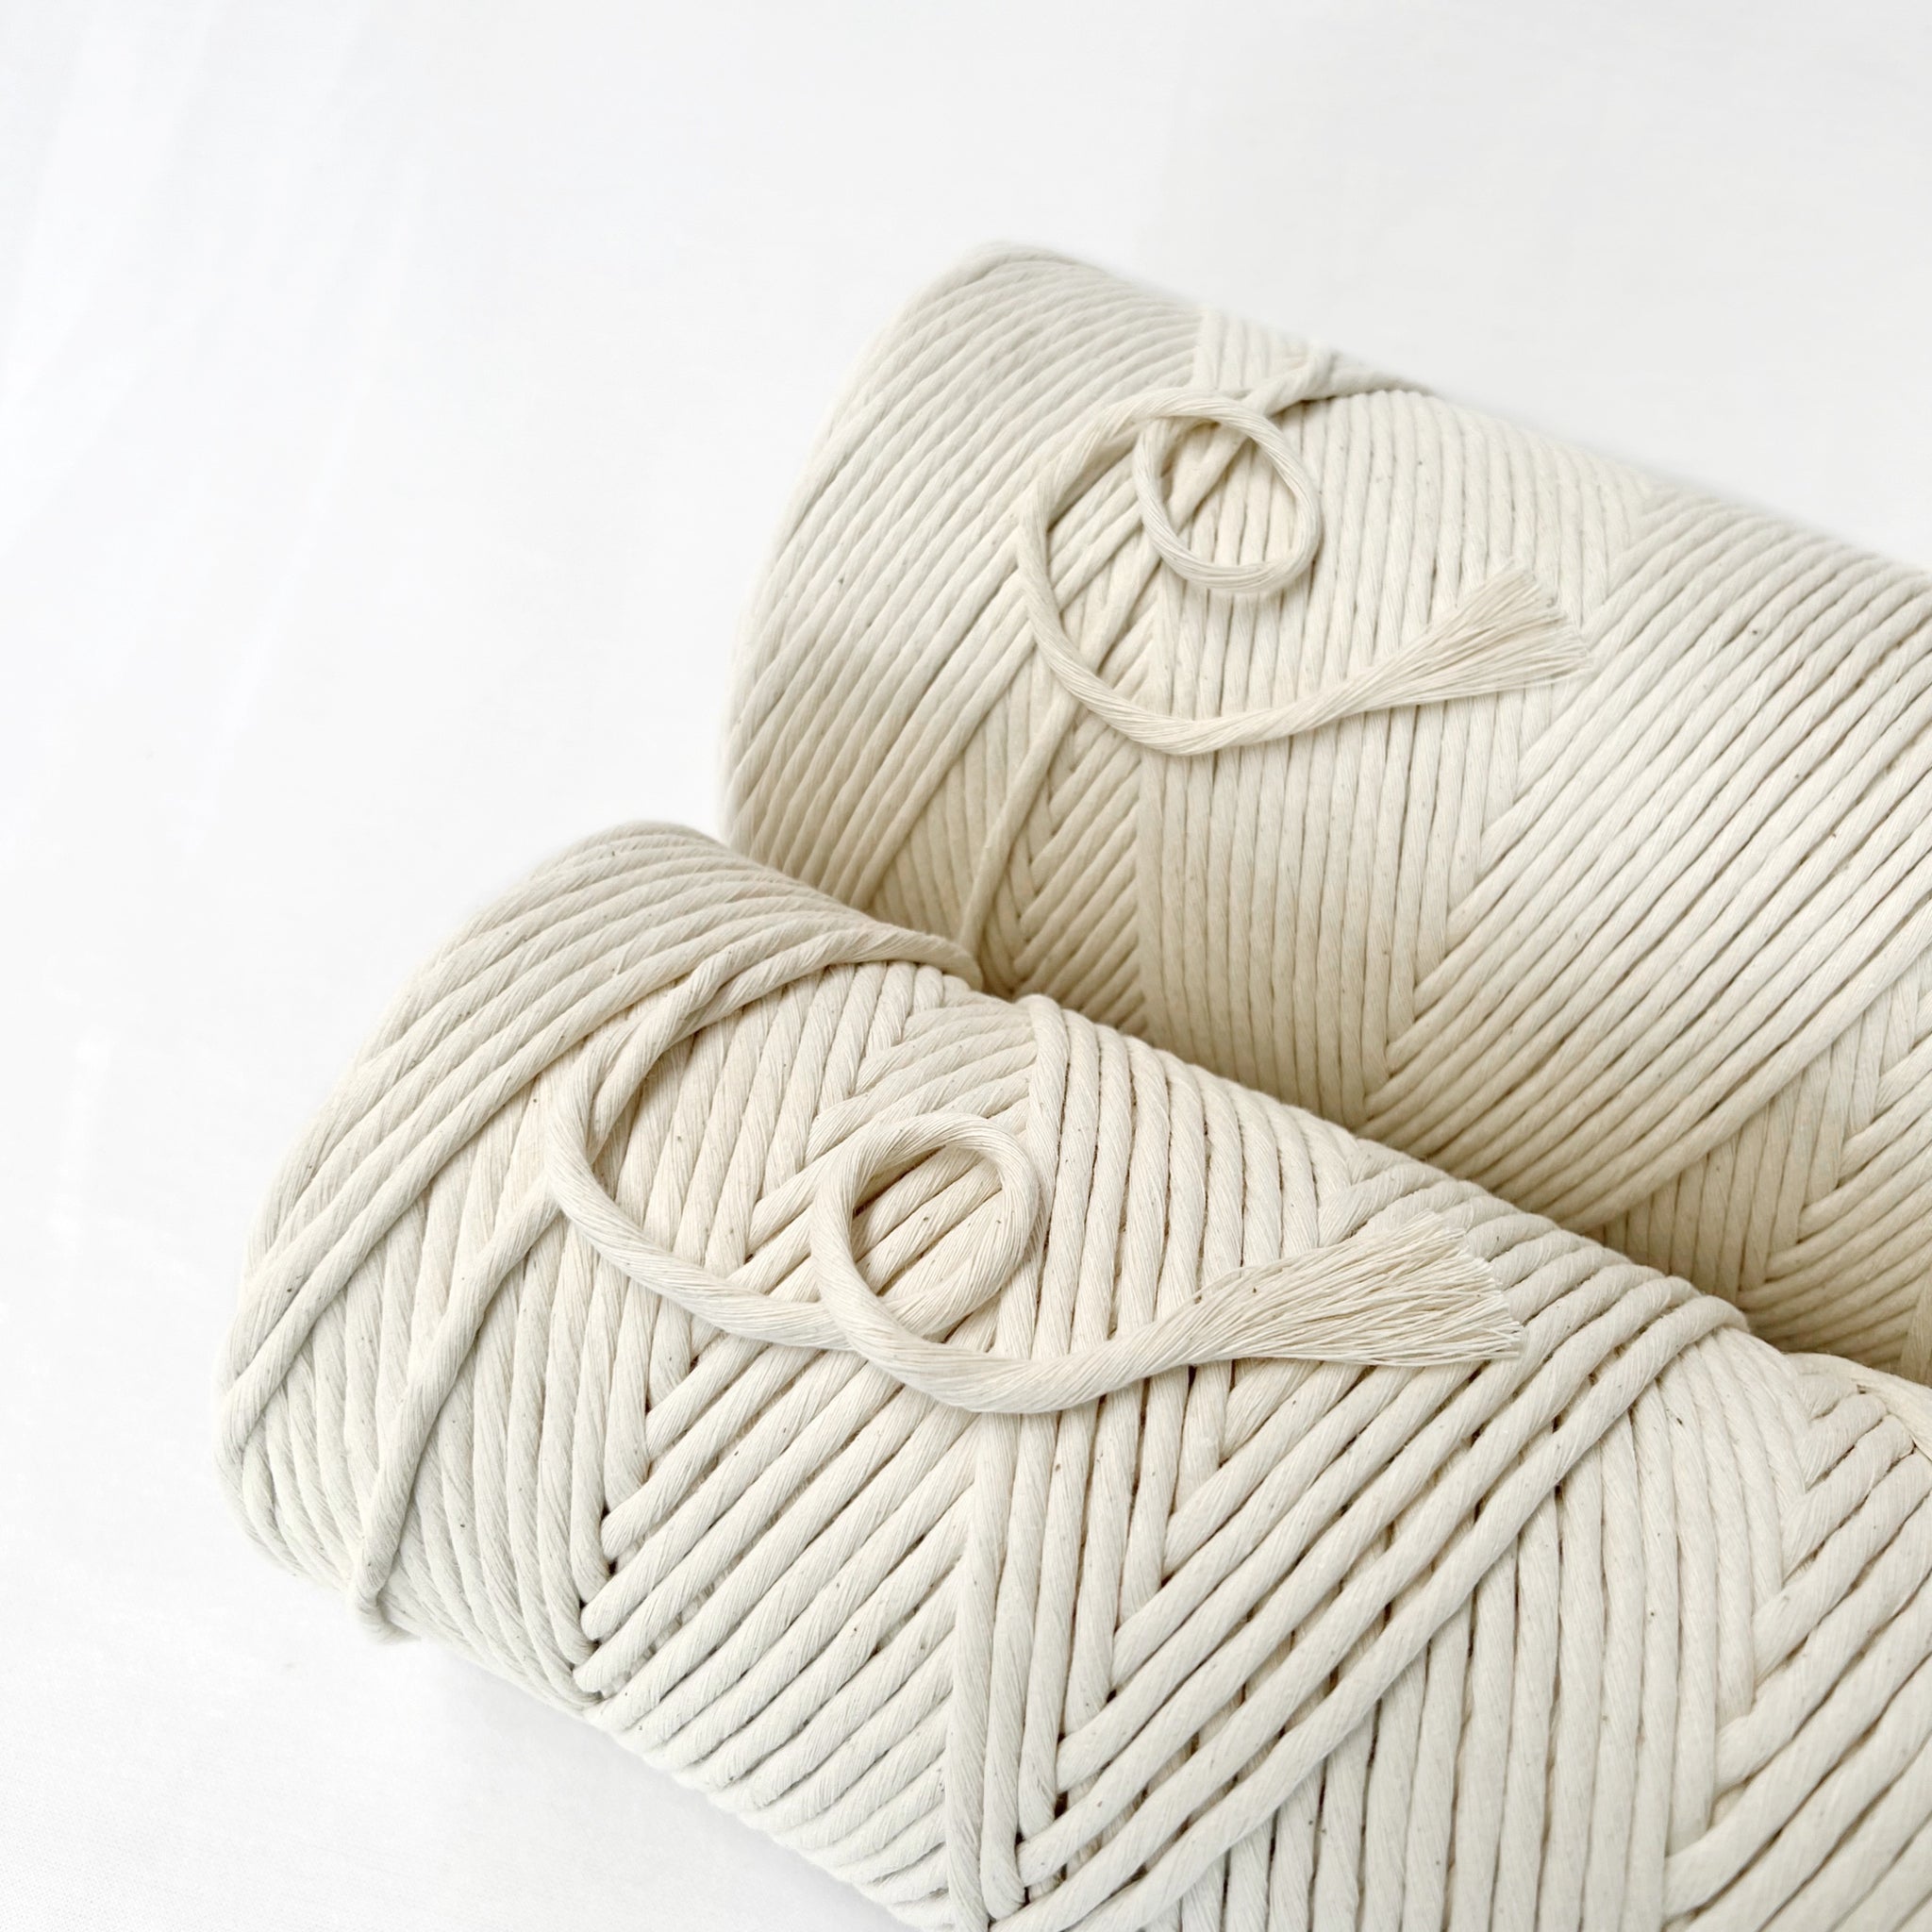 5mm - Macrame Cotton Cord / Wholesale Available - Mary Maker